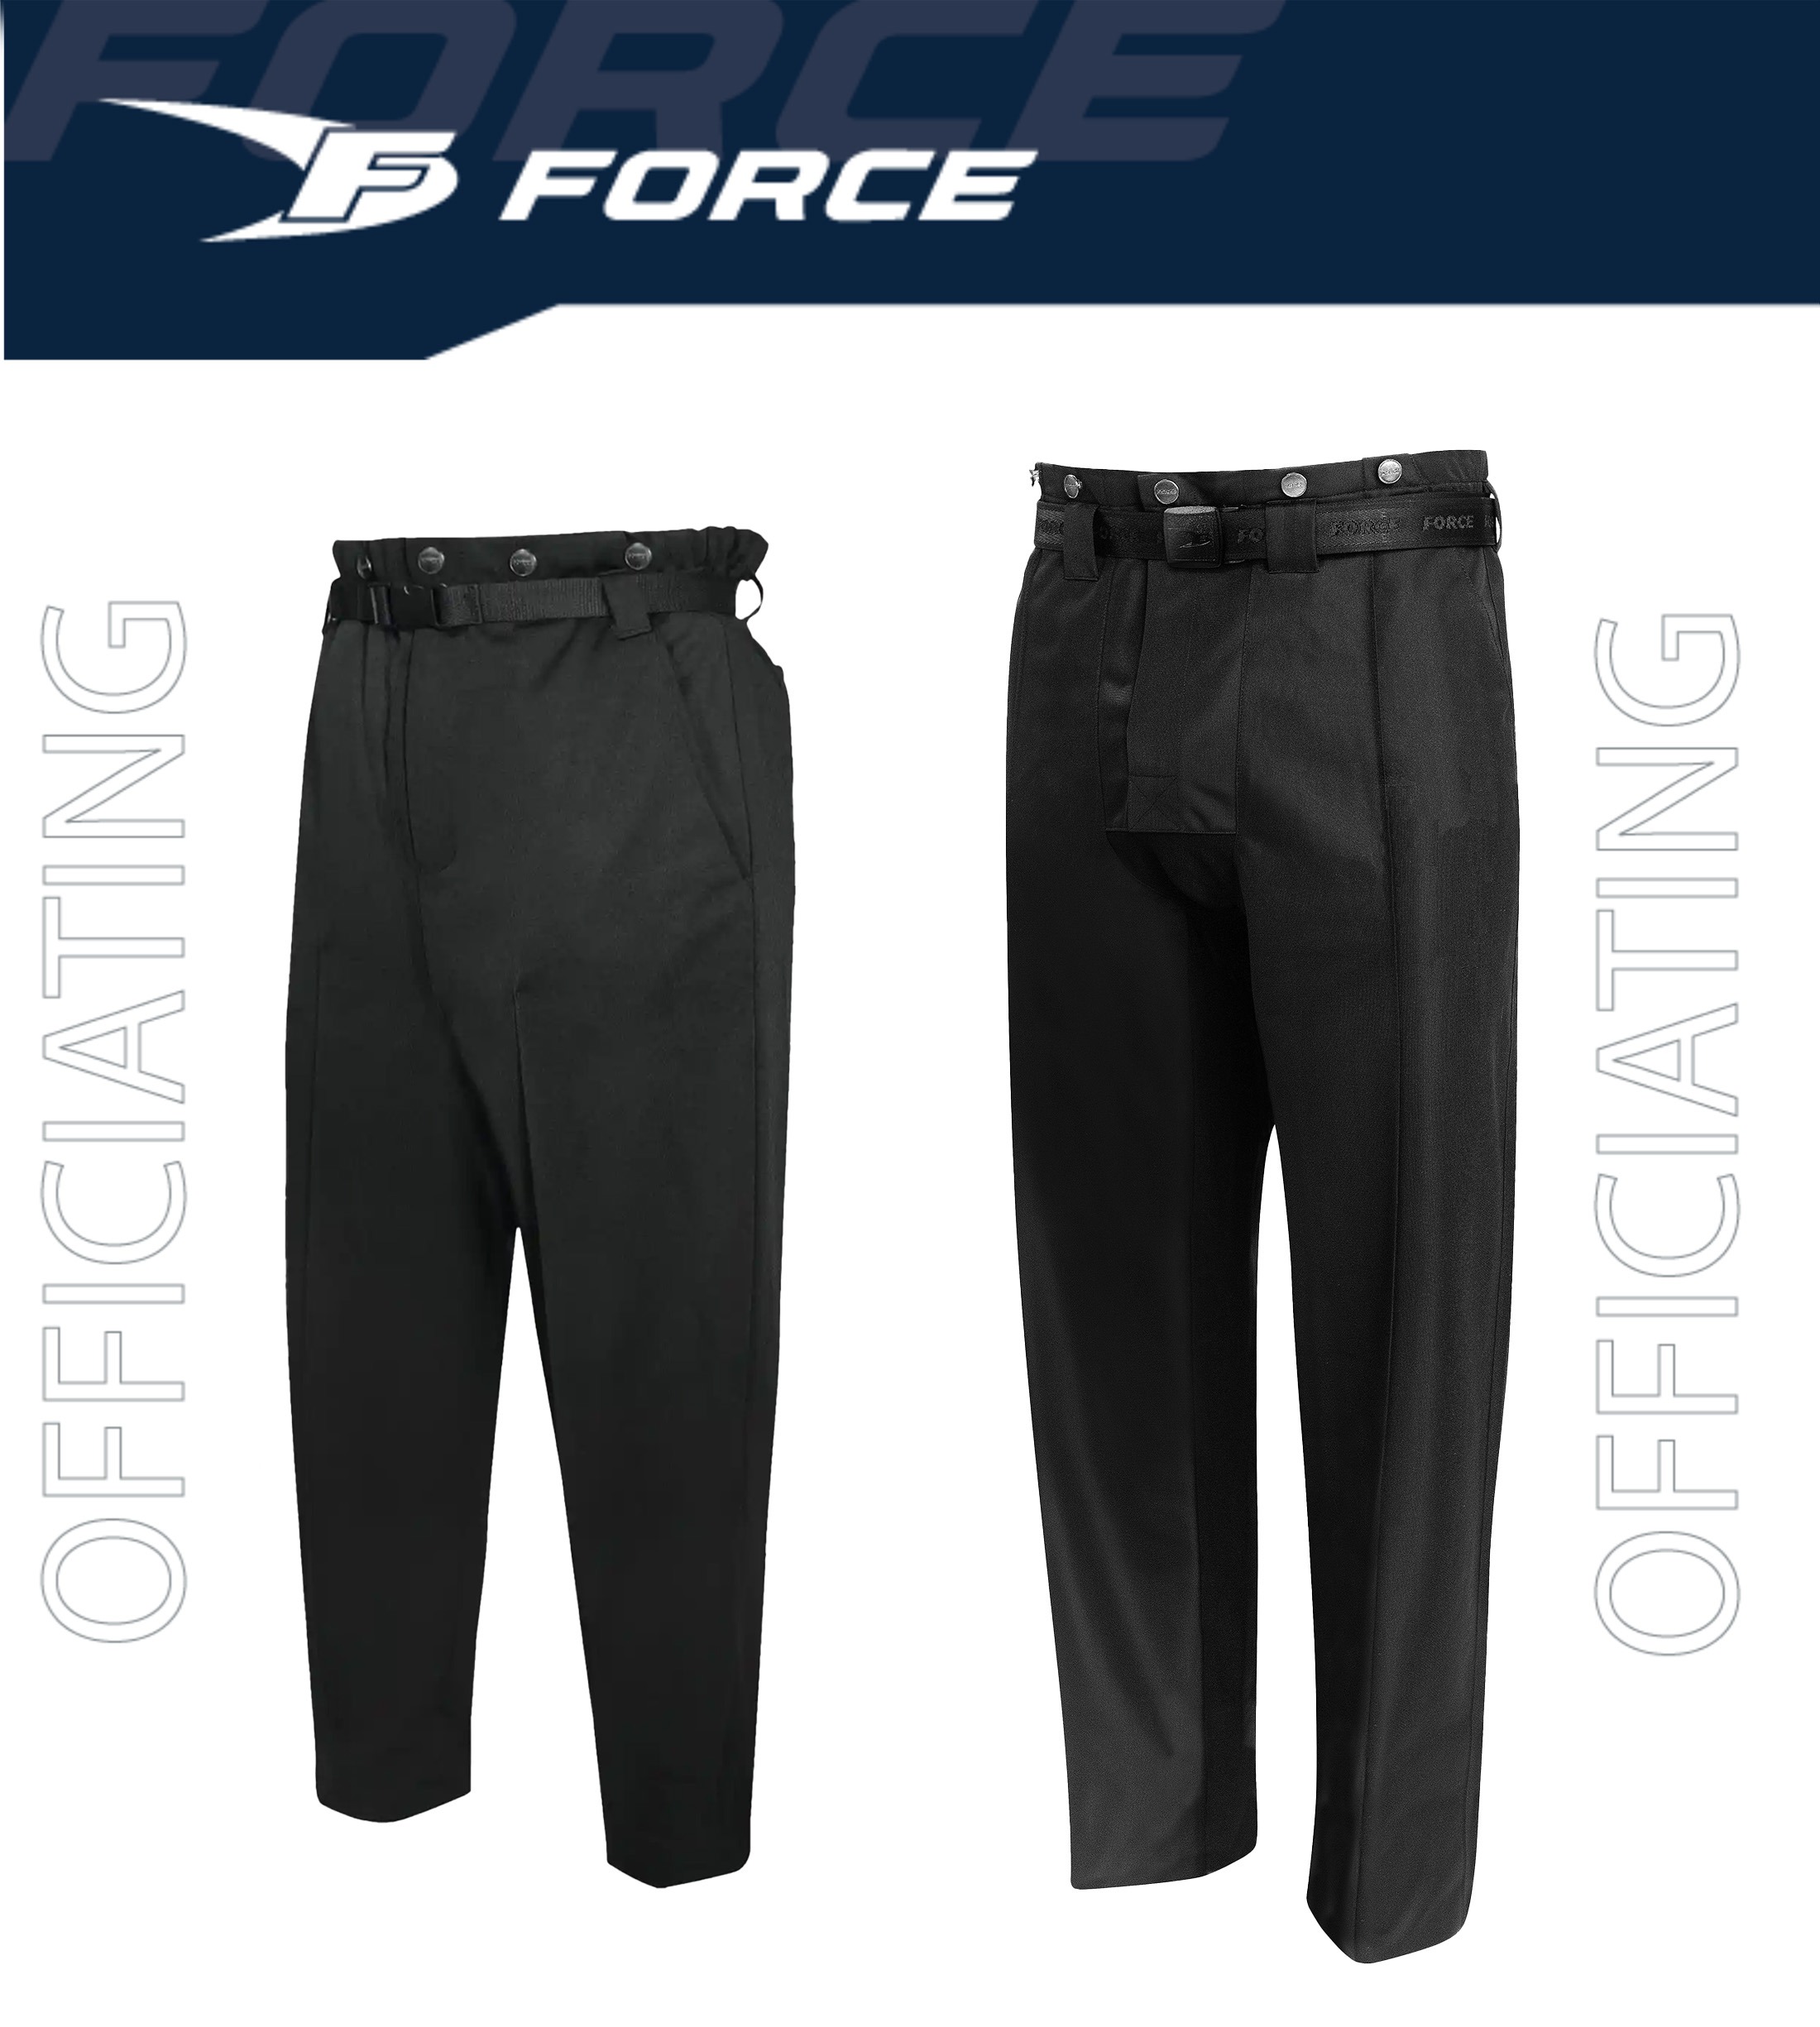 Force Pro Officiating Adult Referee Pant - '21 Model